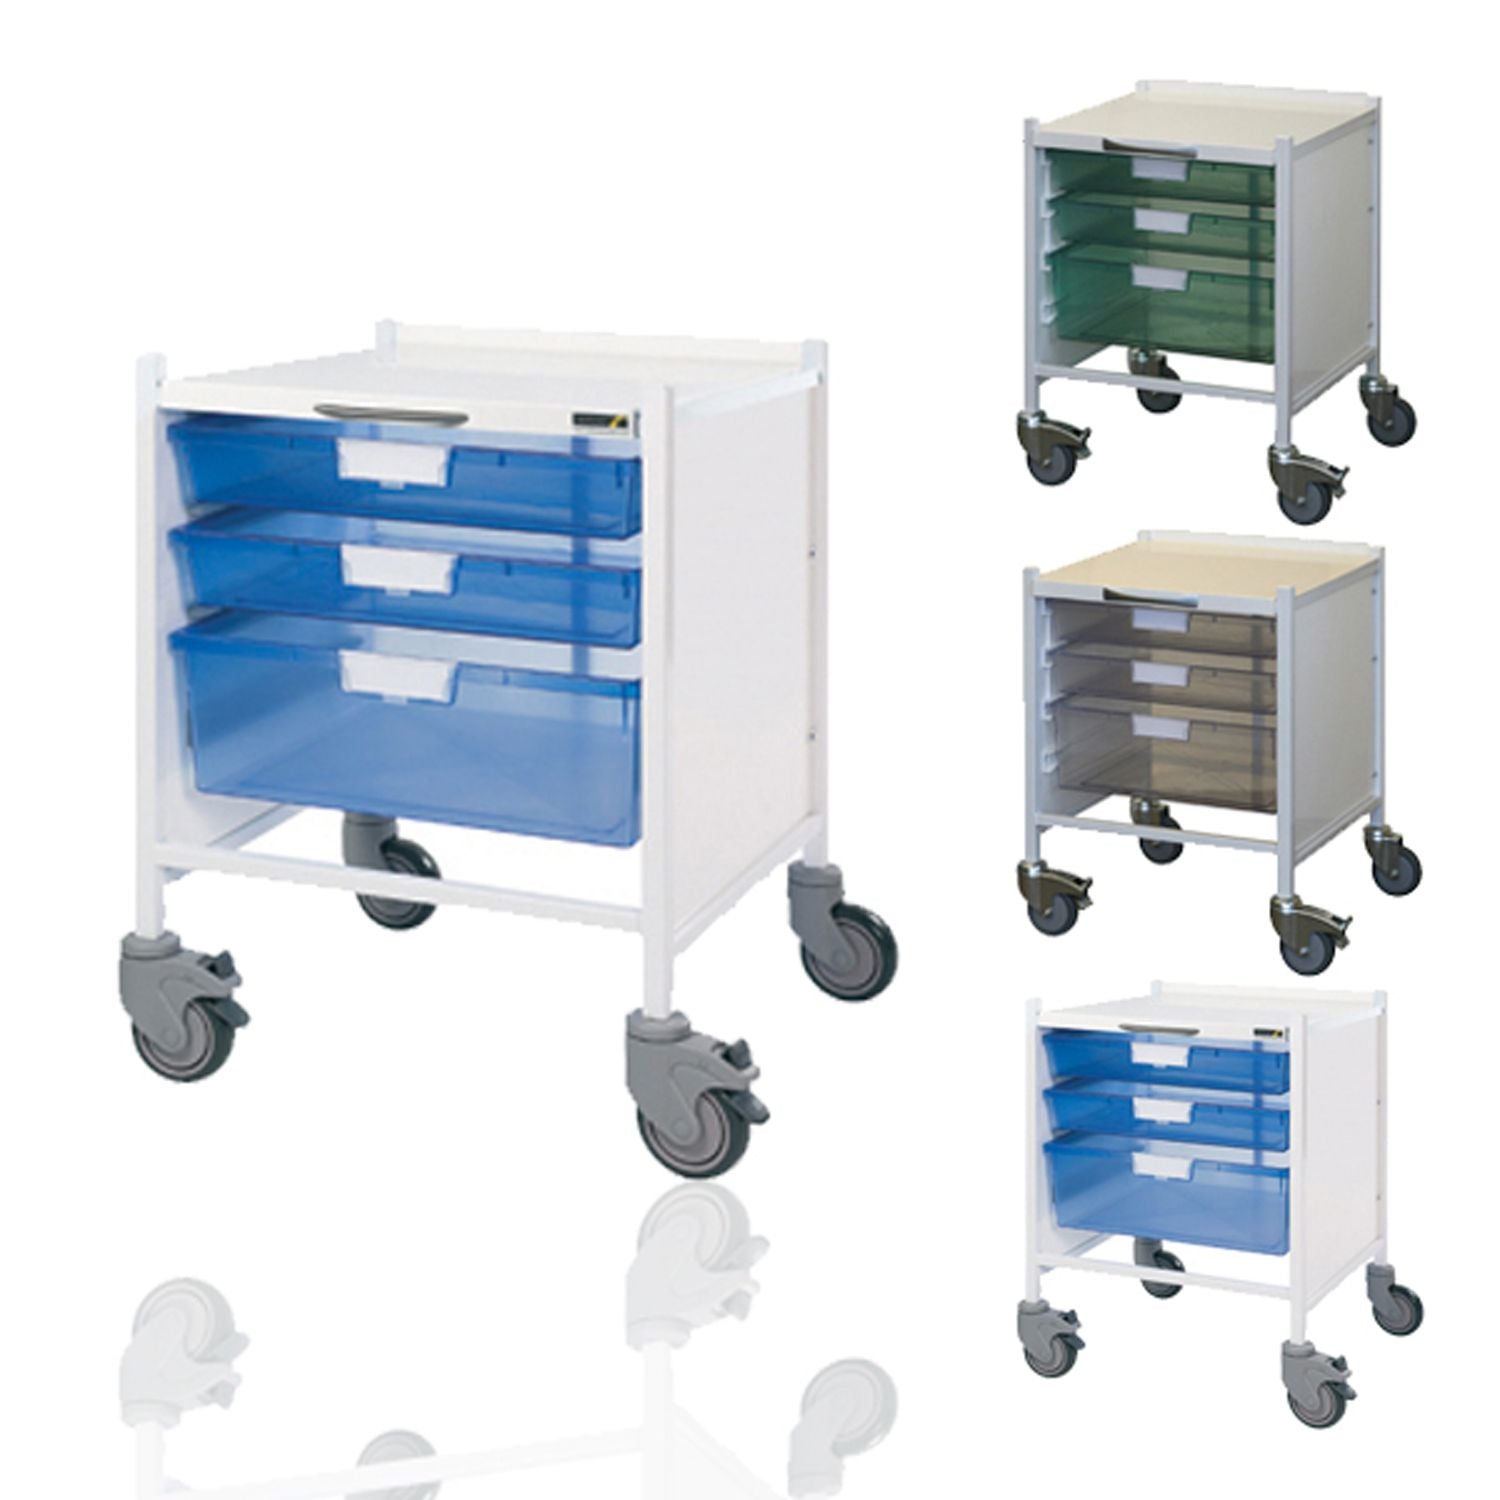 Sunflower Vista 15 Trolley | Two Single Trays & One Double Depth Tray